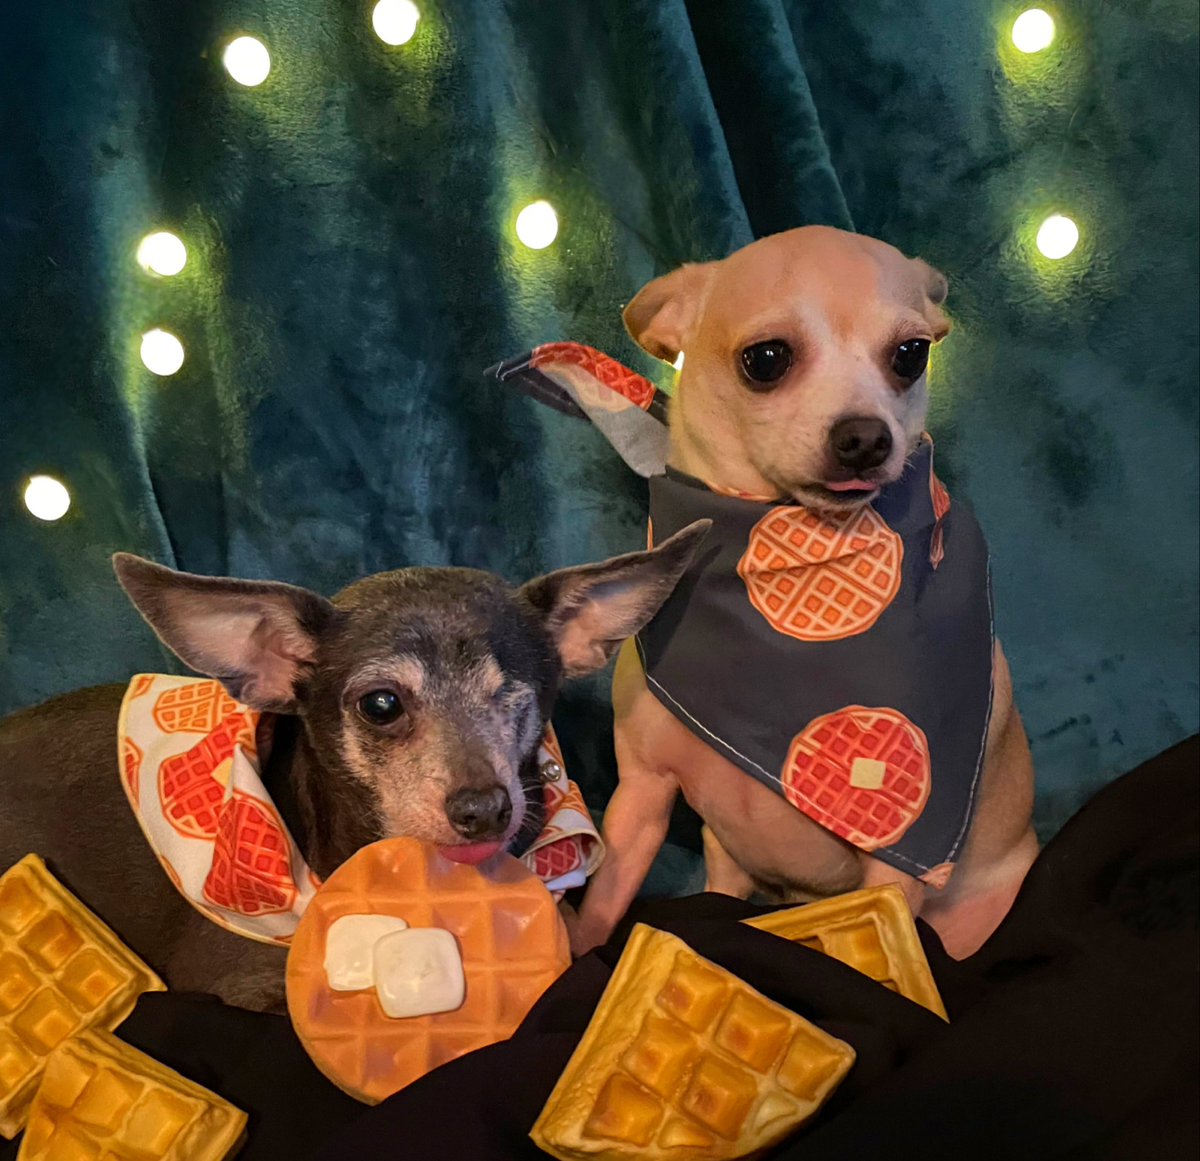 It’s a #NationalWaffleDay & #TongueOutTuesday mash-up!
🧇👅🧇
Shyla Mae & Jasper & their dainty chihuahua tongues love #WafflesWafflesWaffles !
🧇👅🧇
#Chihuahuas #RescueDogs #DogTwitter #DogsOfTwitter #DogsonTwitter #AdoptDontShop